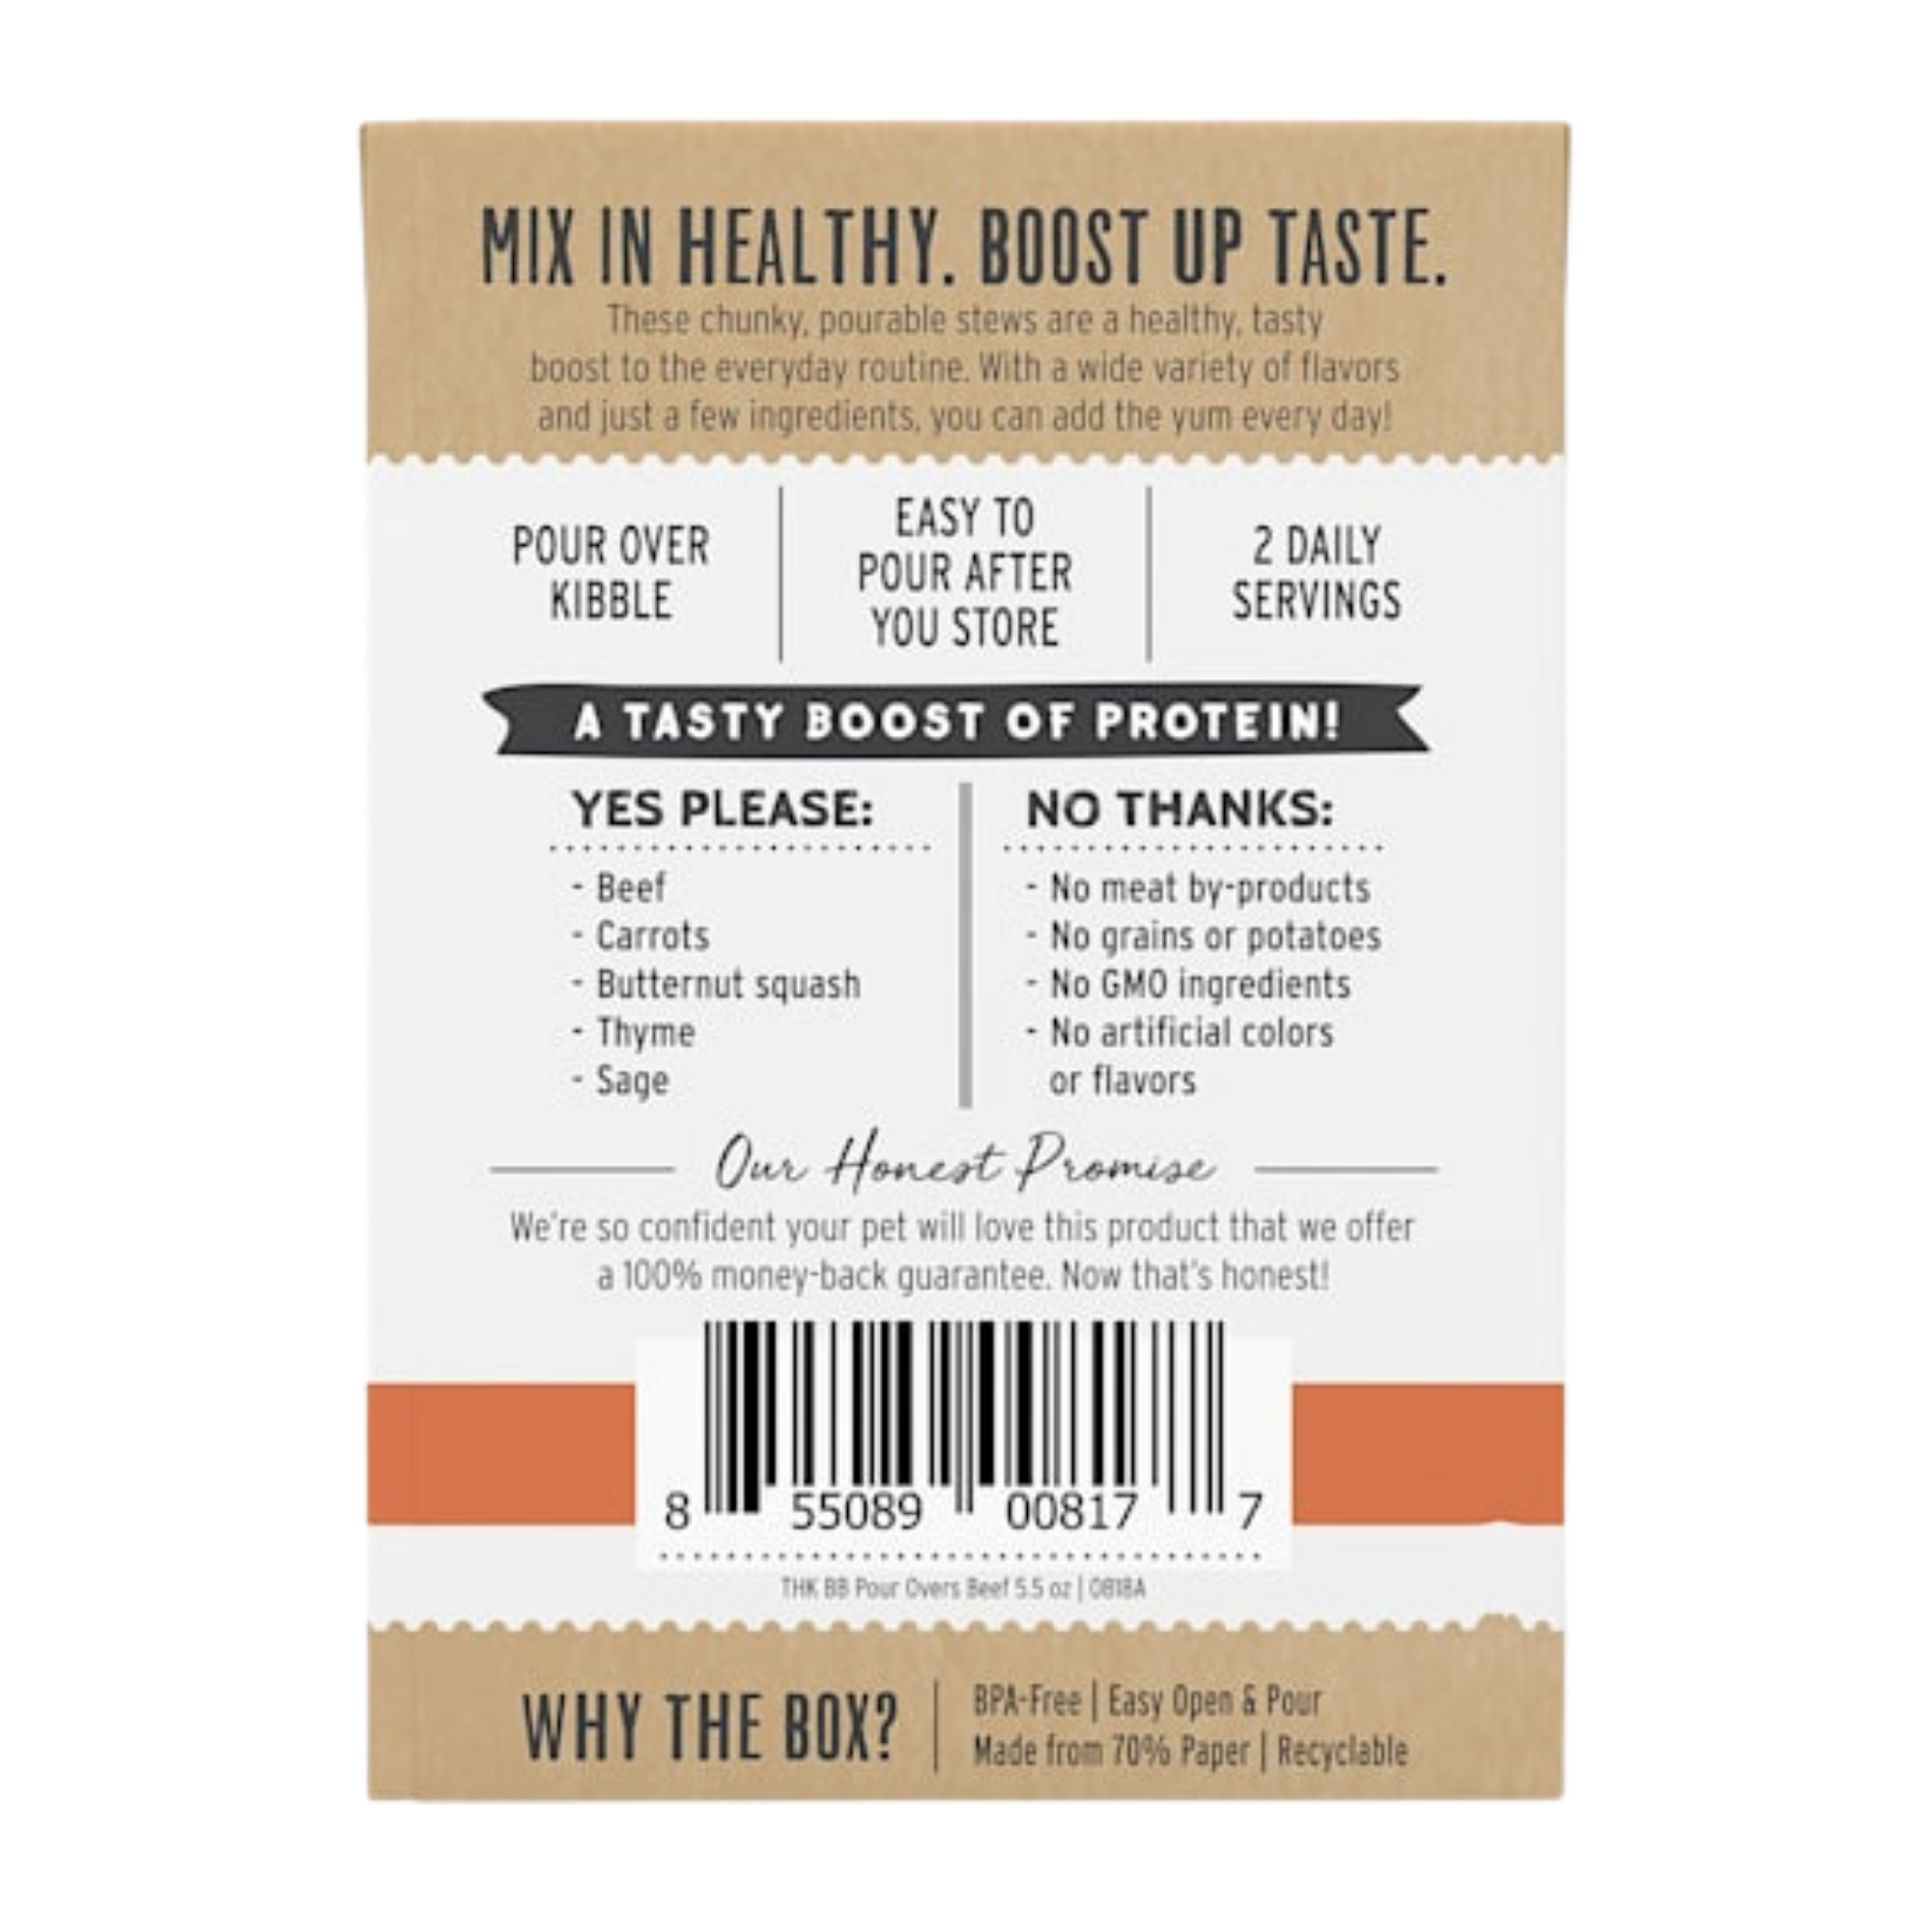 The Honest Kitchen Bone Broth Pour Overs Beef Stew 5.5 oz - Mutts & Co.